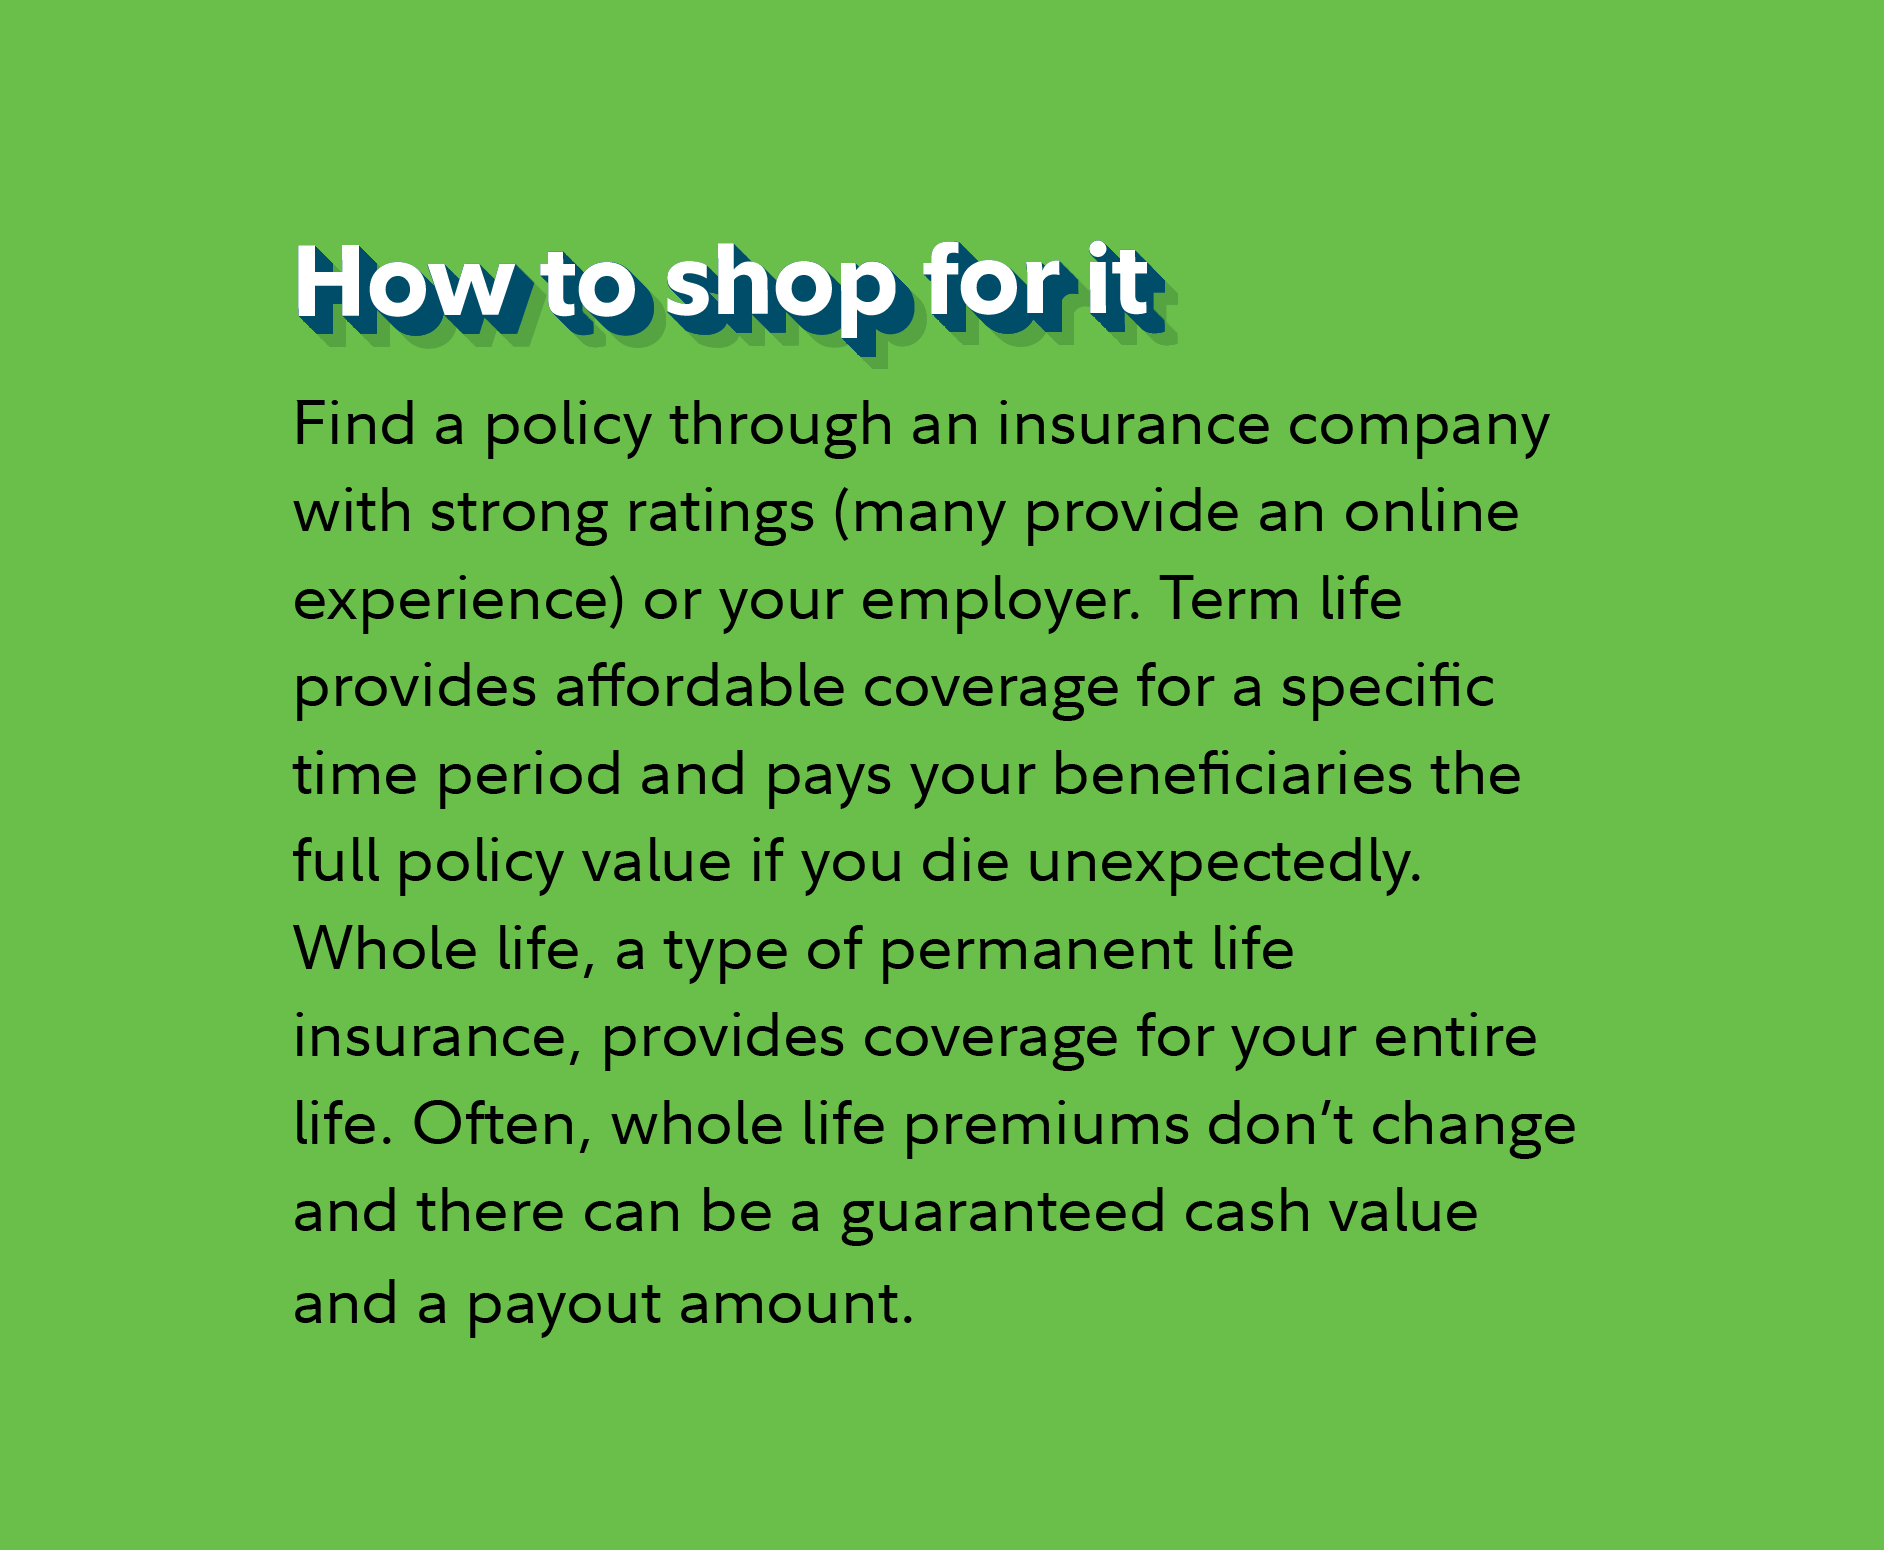 How to shop for it Find a policy through an insurance company with strong ratings (many provide an online experience) or your employer. Term life provides affordable coverage for a specific time period and pays your beneficiaries the full policy value if you die unexpectedly. Whole life, a type of permanent life insurance, provides coverage for your entire life. Often, whole life premiums don’t change and there can be a guaranteed cash value and a payout amount.